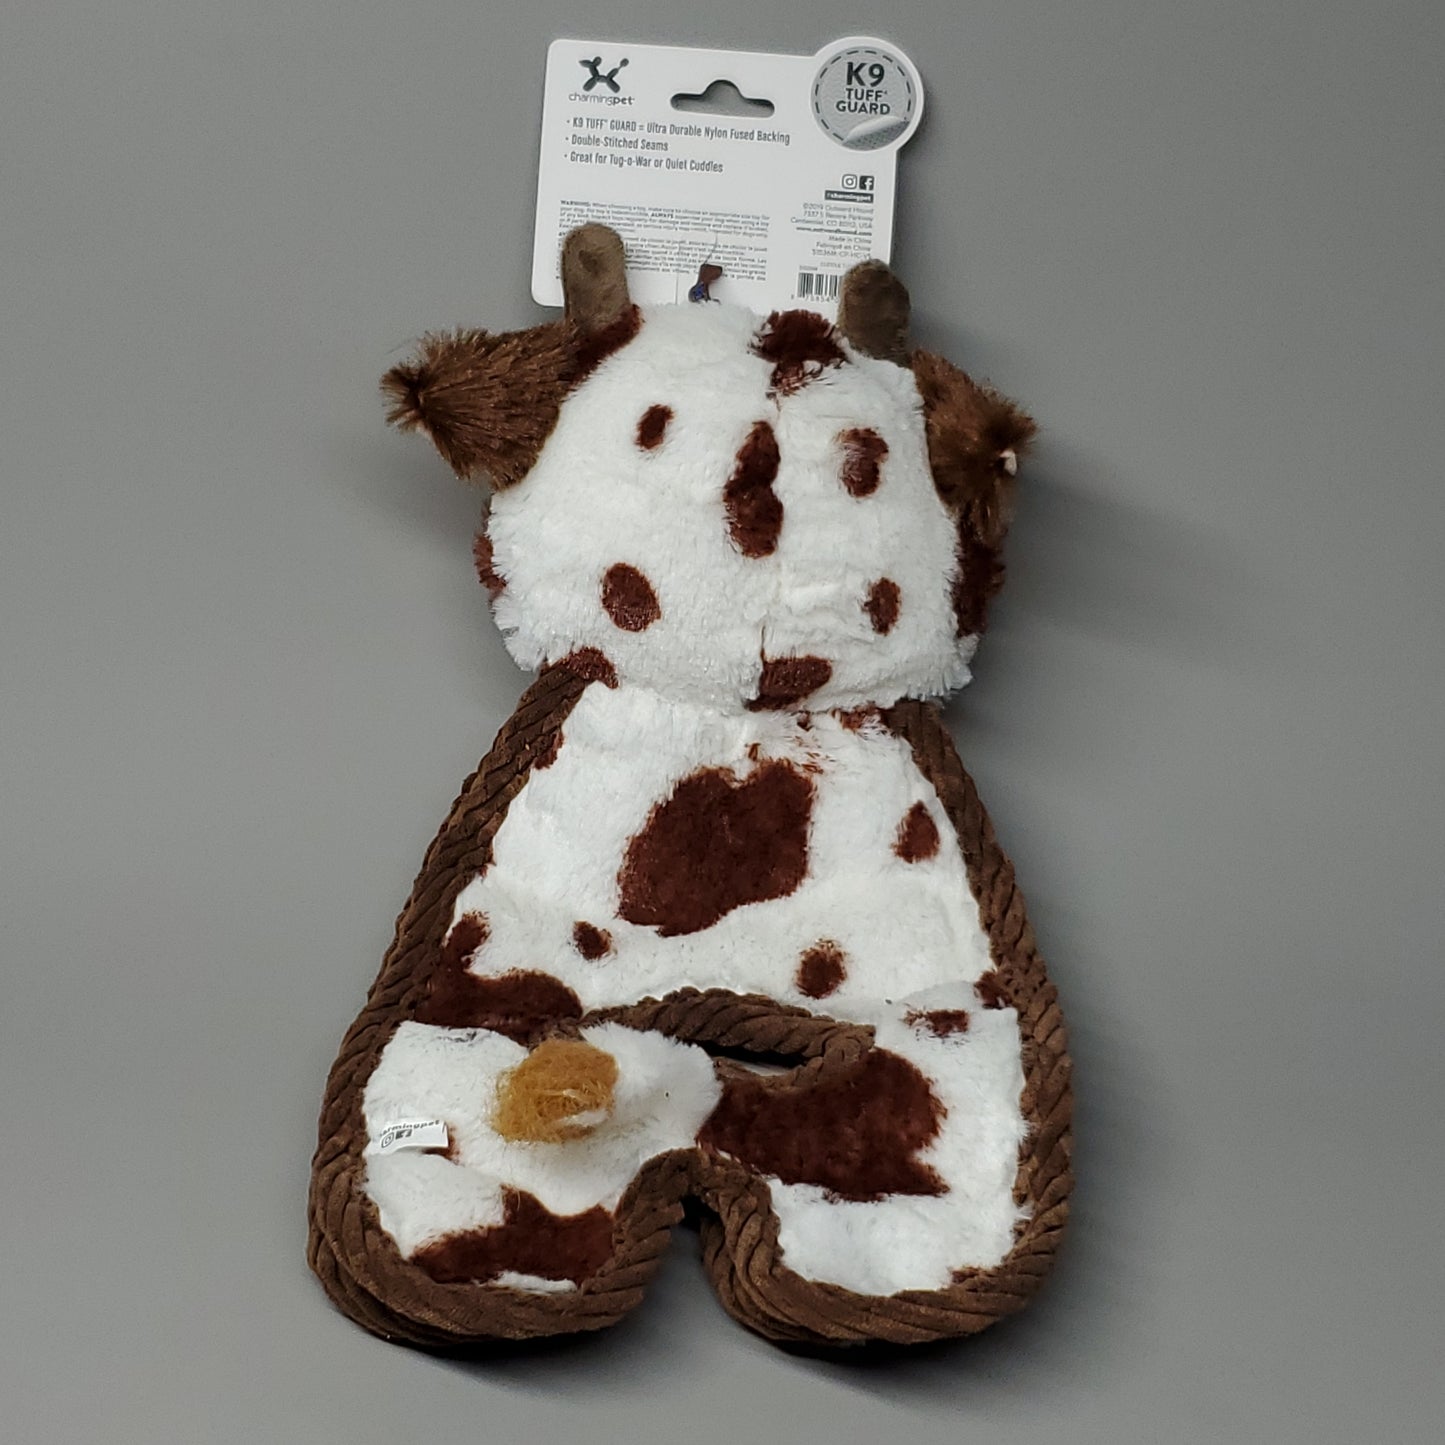 CHARMING PET Cuddle Tugs Brown Cow K9 Tuff Guard Ultra Durable 51036M (New)